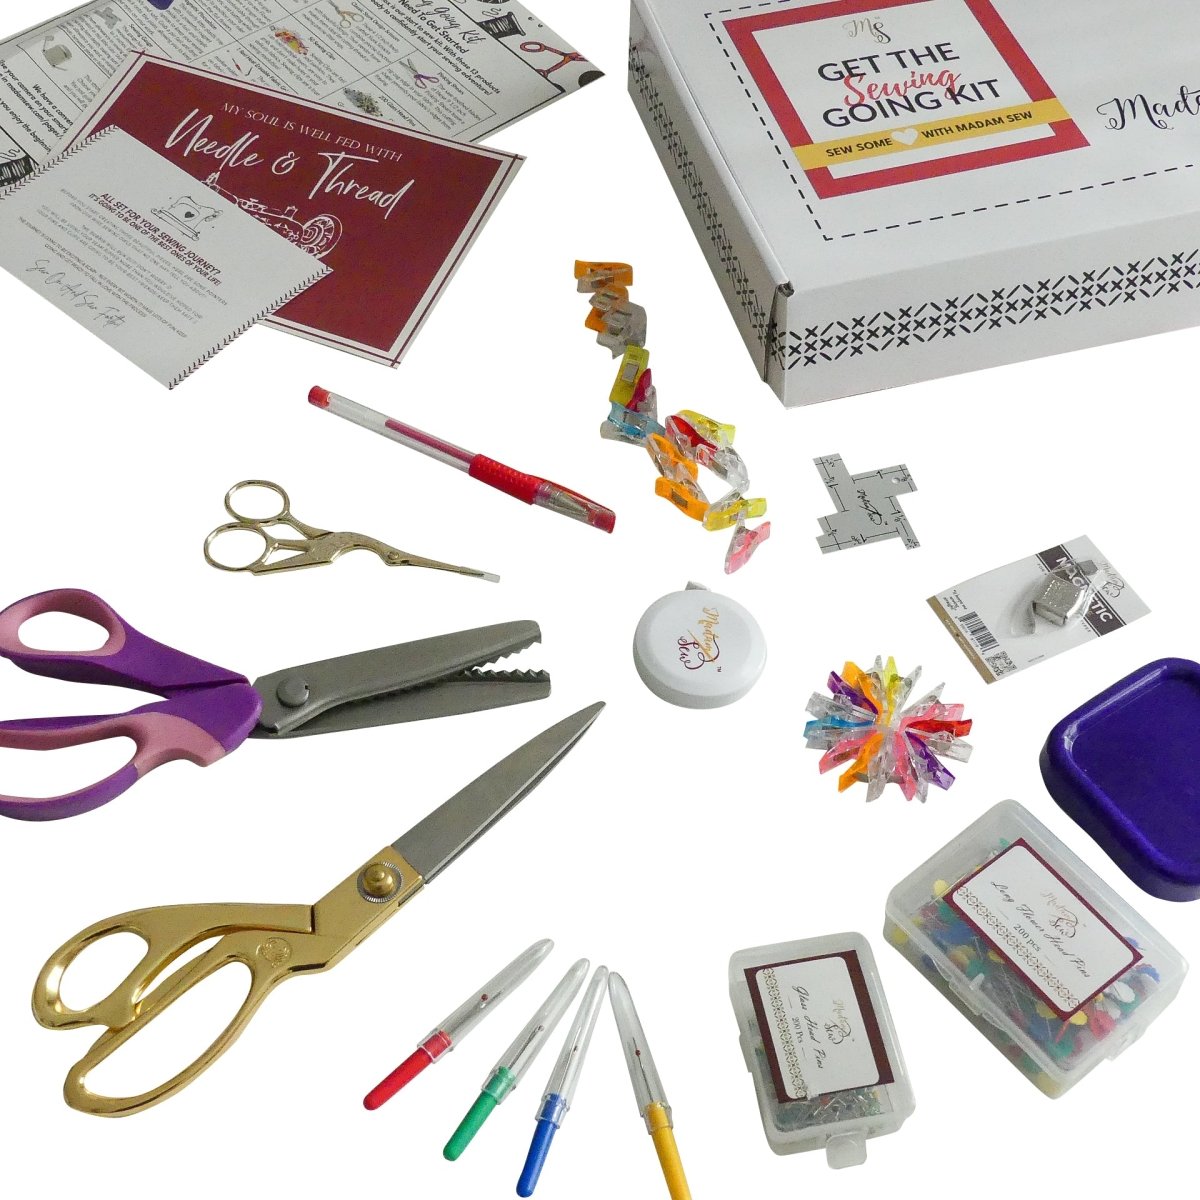 Sewing tools bundle for beginners with all basic sewing tools